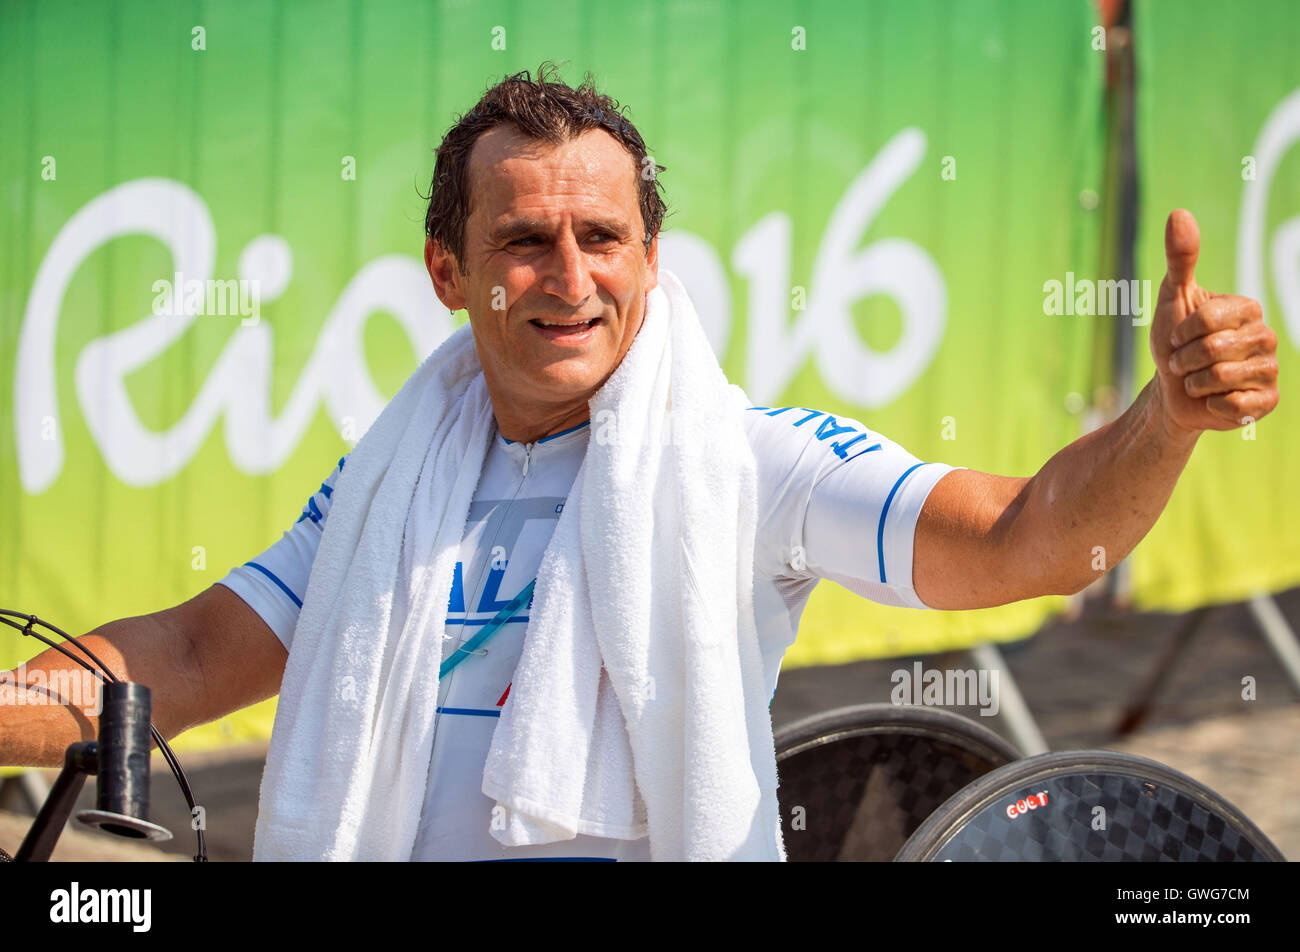 Italy's Alessandro Zanardi is overcome by emotion after winning gold in the Men's Time Trial H5 held in Pontal during the Rio 2016 Paralympic Games, Rio de Janeiro, Brazil, 14 September 2016. Photo: Jens Buettner/dpa Stock Photo